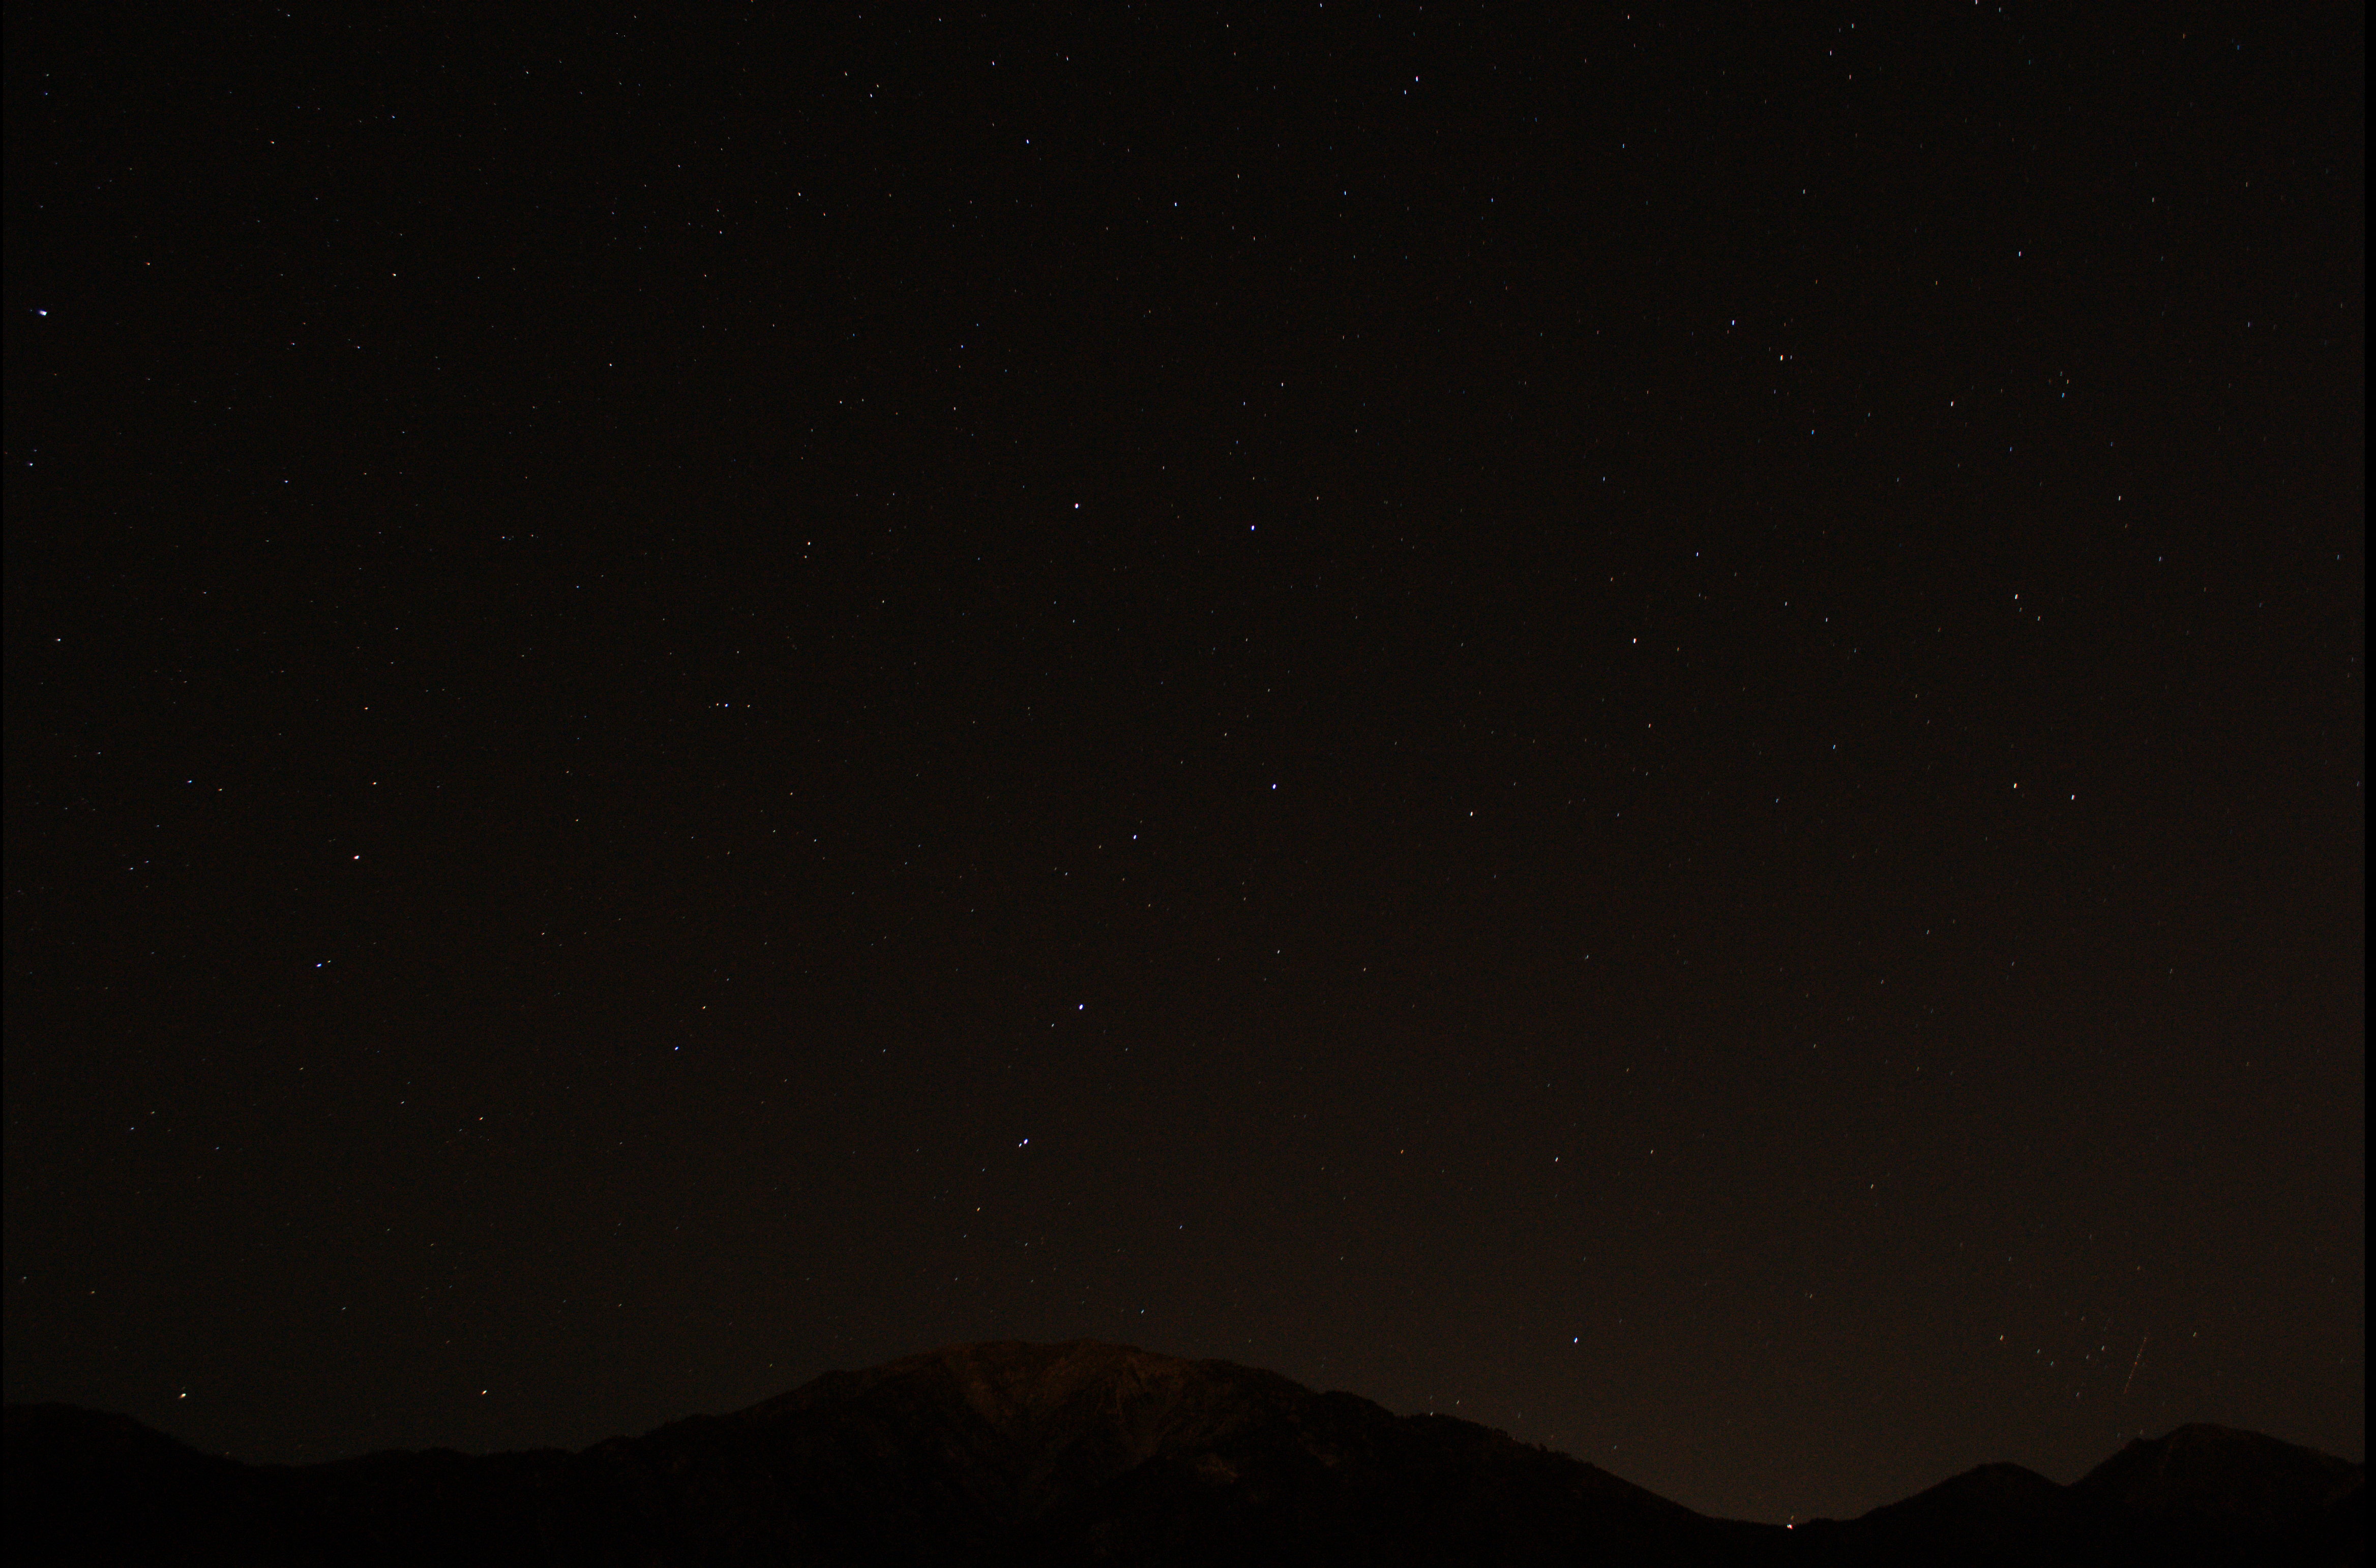 Same Geminid shot but from the raw file